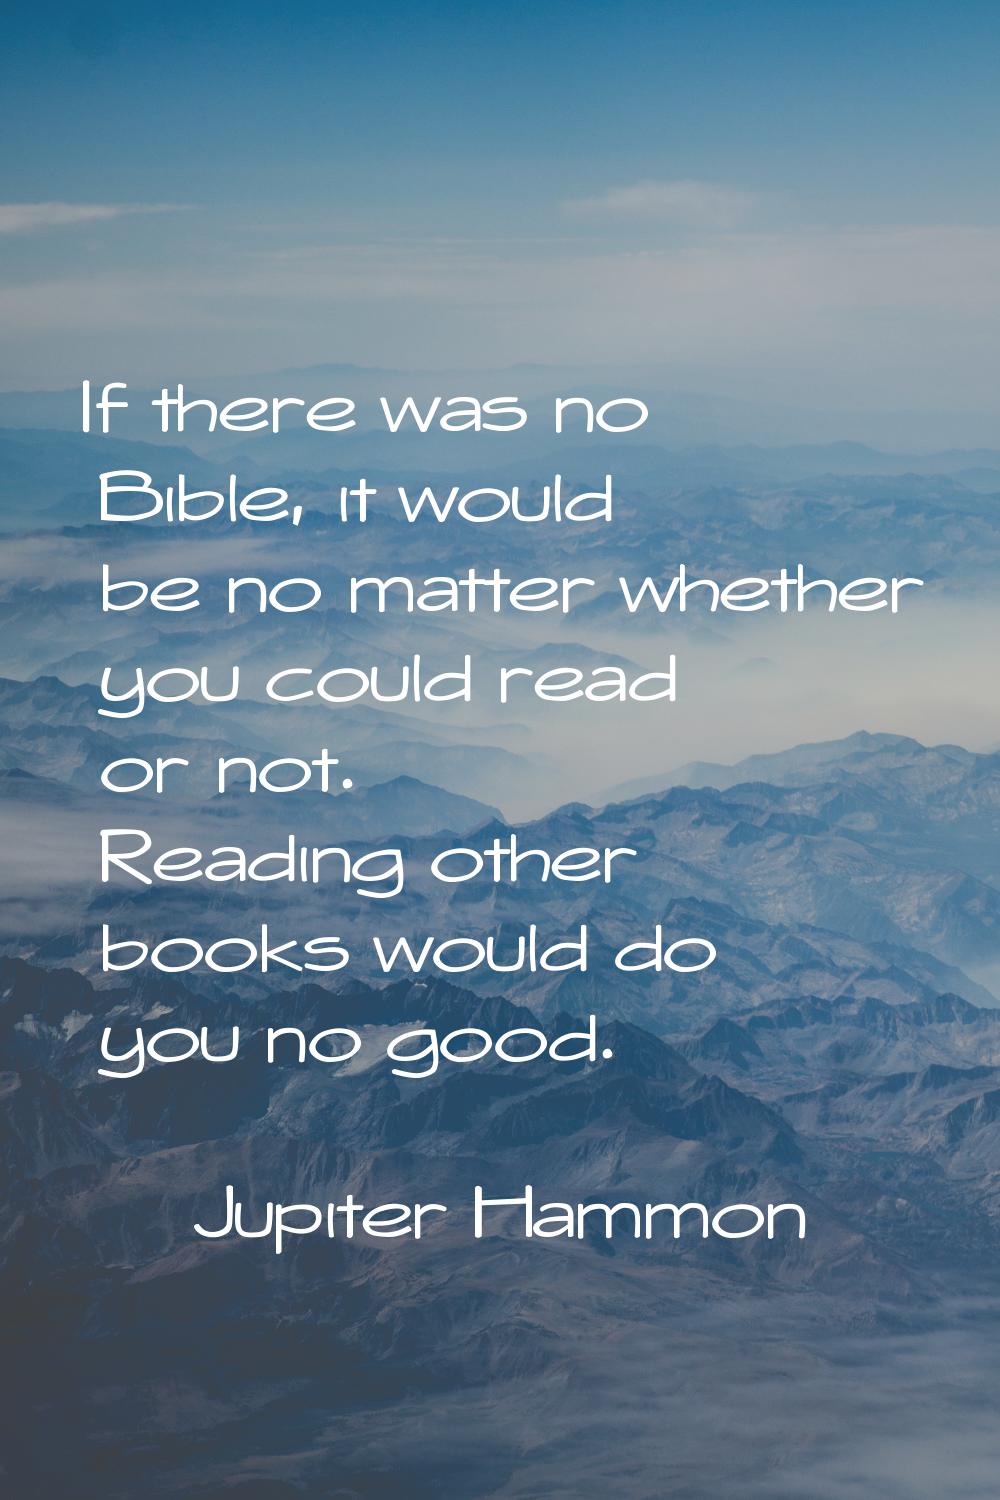 If there was no Bible, it would be no matter whether you could read or not. Reading other books wou